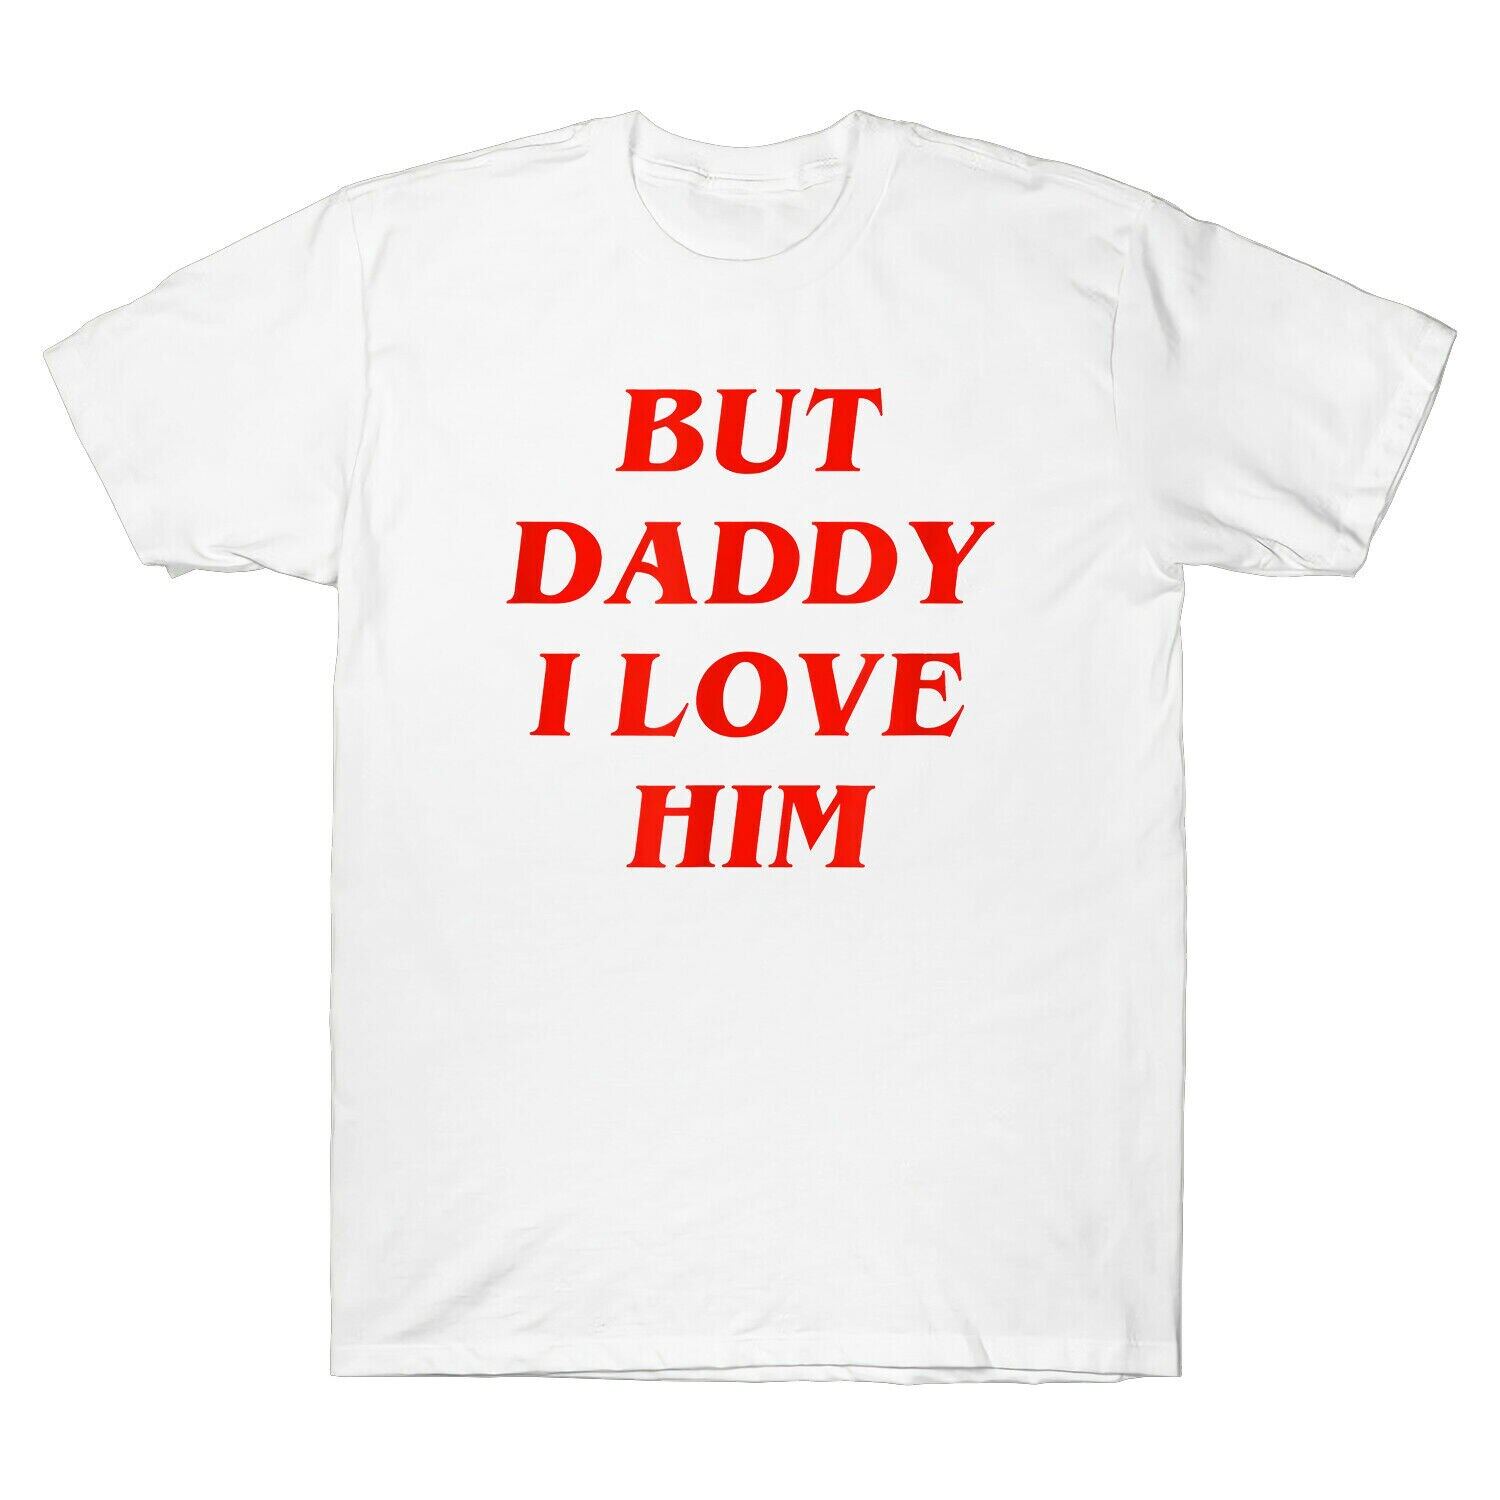 But Daddy I Love Him Comic Love Funny Slogan Men T Shirt Cotton White Tee Casual Loose 